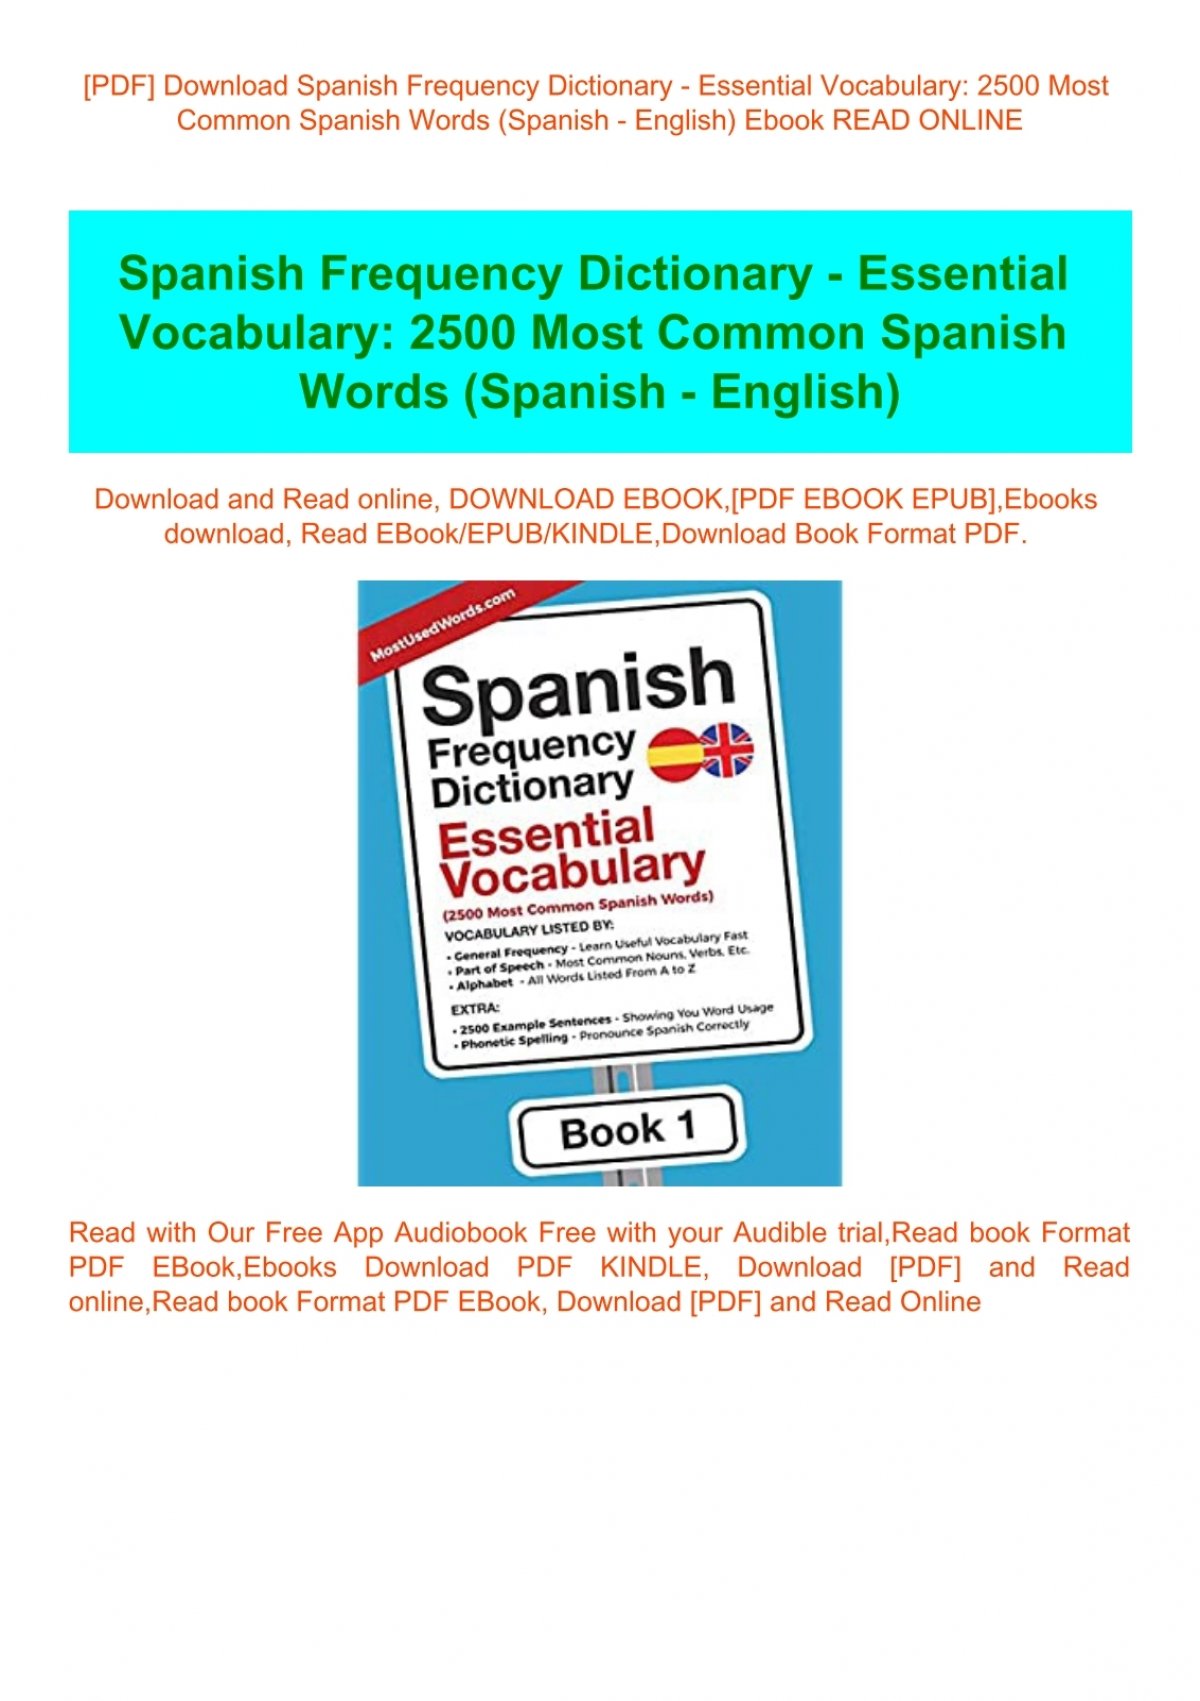 pdf-download-spanish-frequency-dictionary-essential-vocabulary-2500